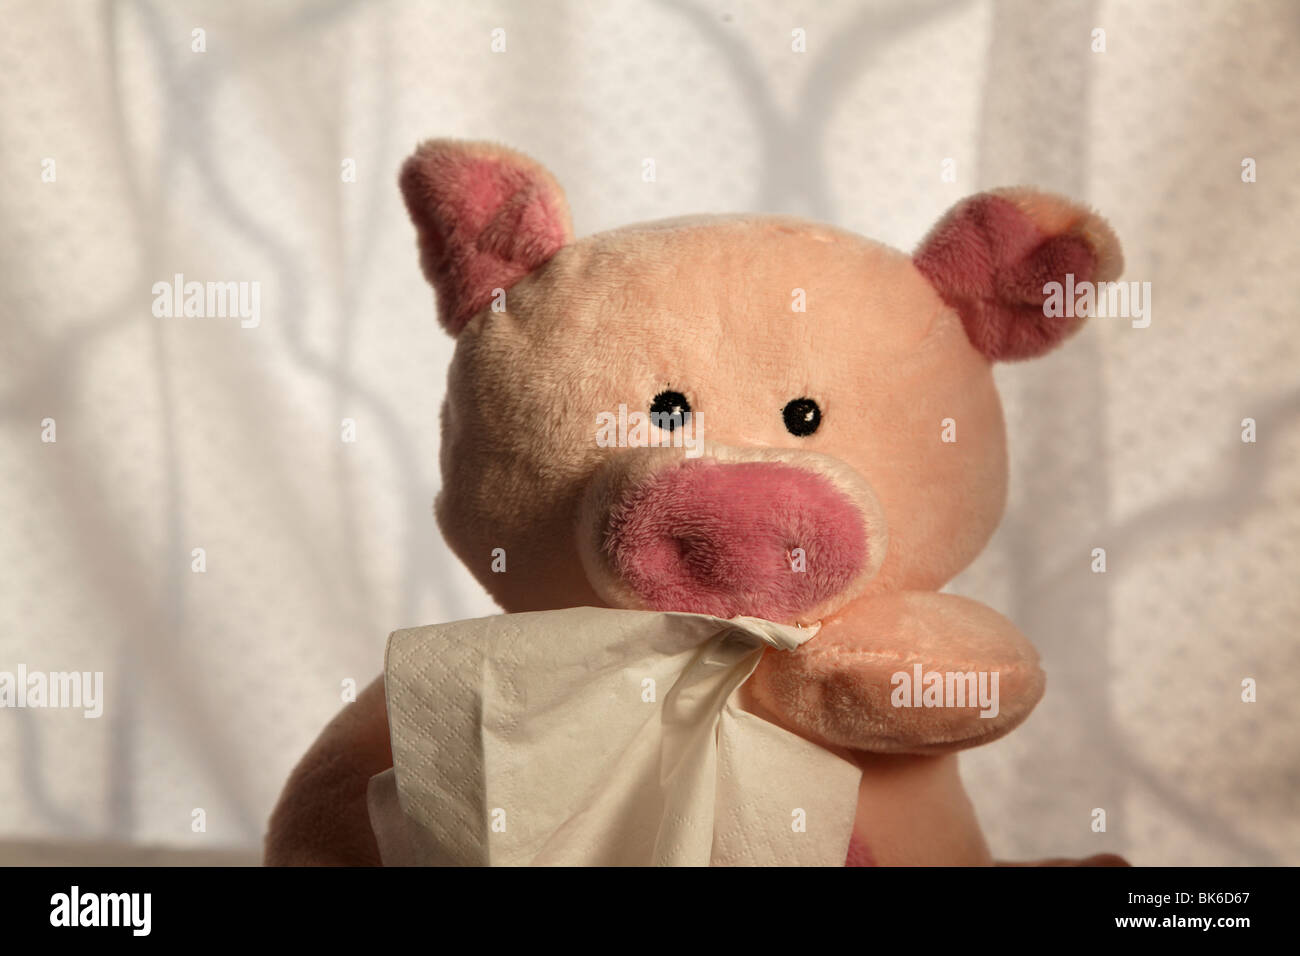 Toy pig with paper handkerchief, head shot. Stock Photo